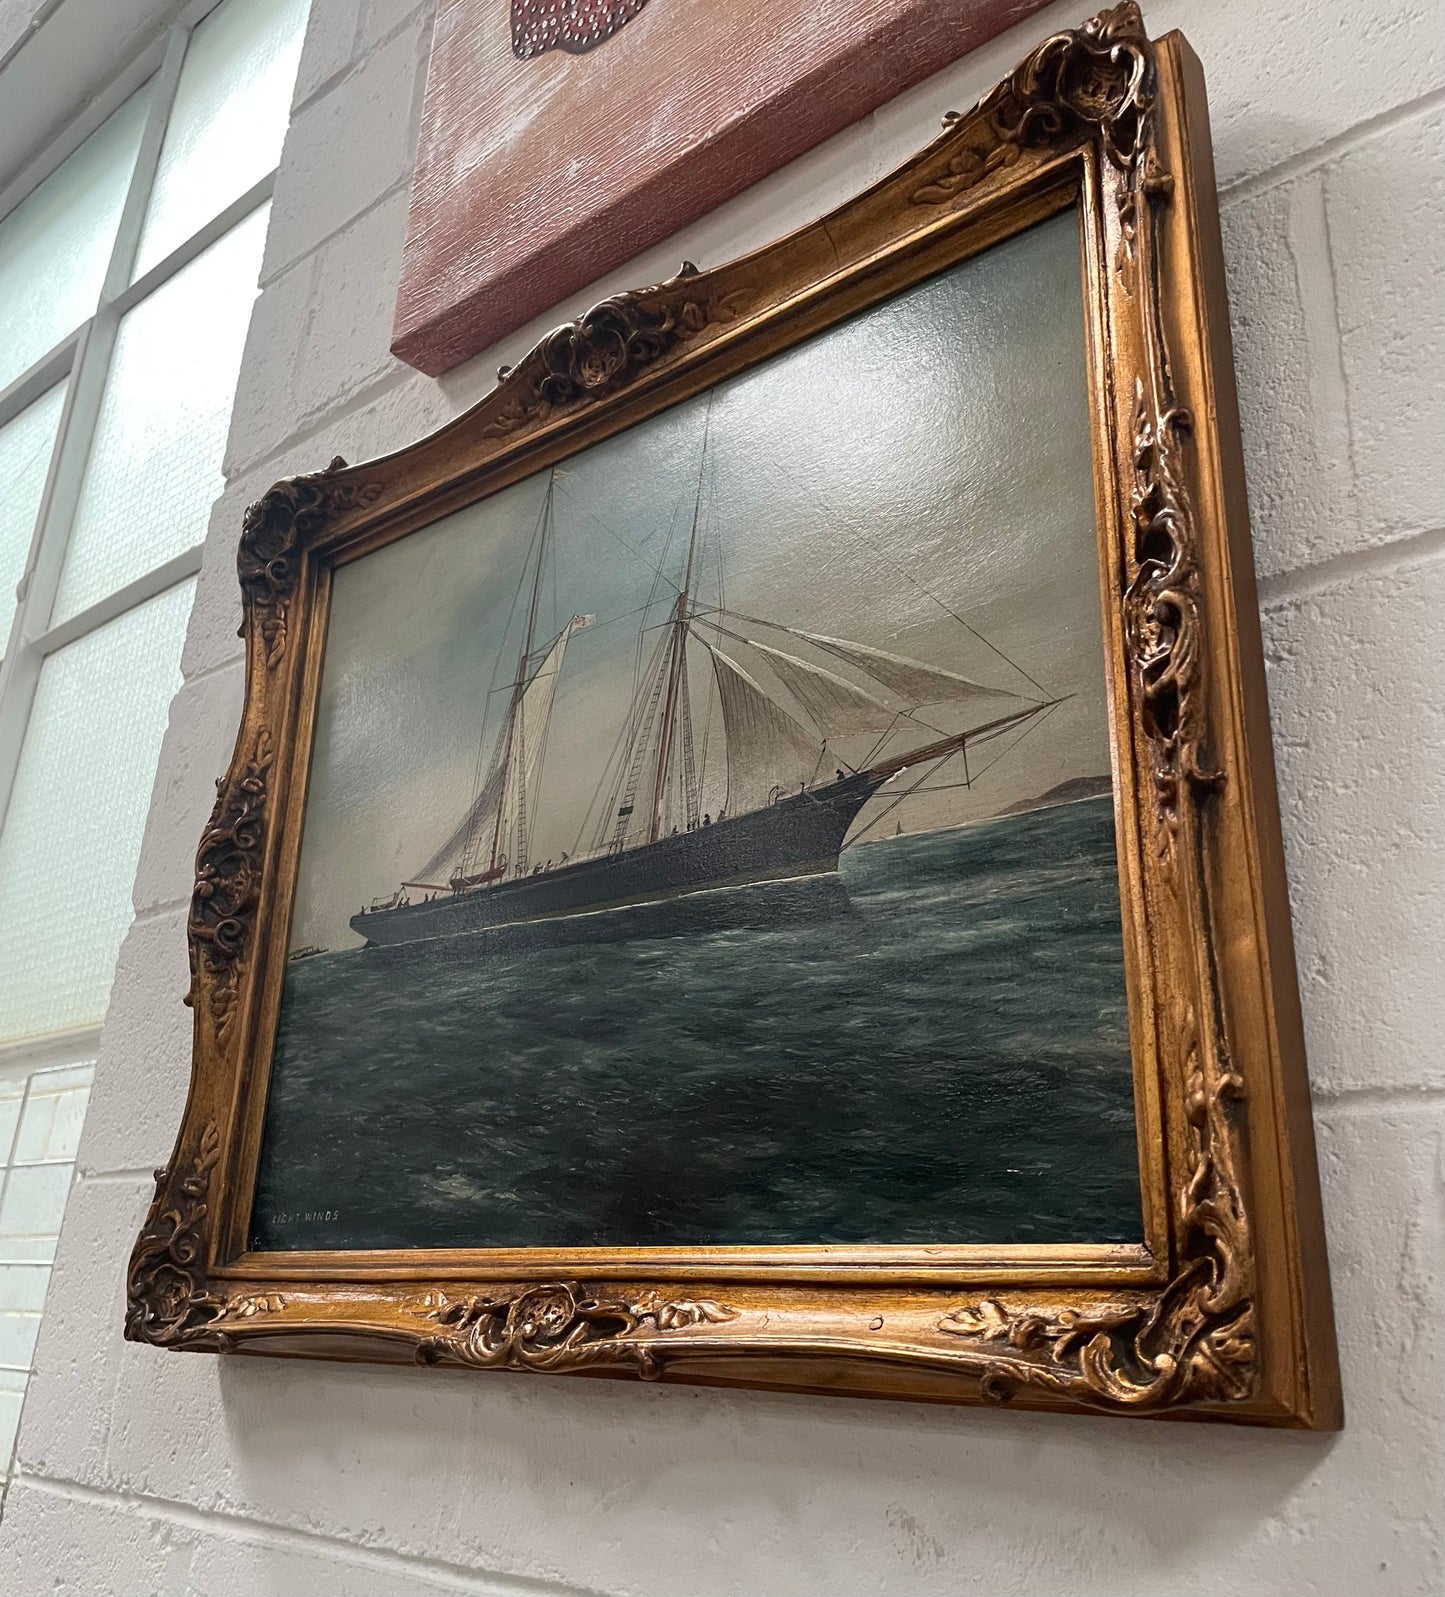 Fabulous Antique 19th Century Oil on Board Ship Painting "Light Winds"